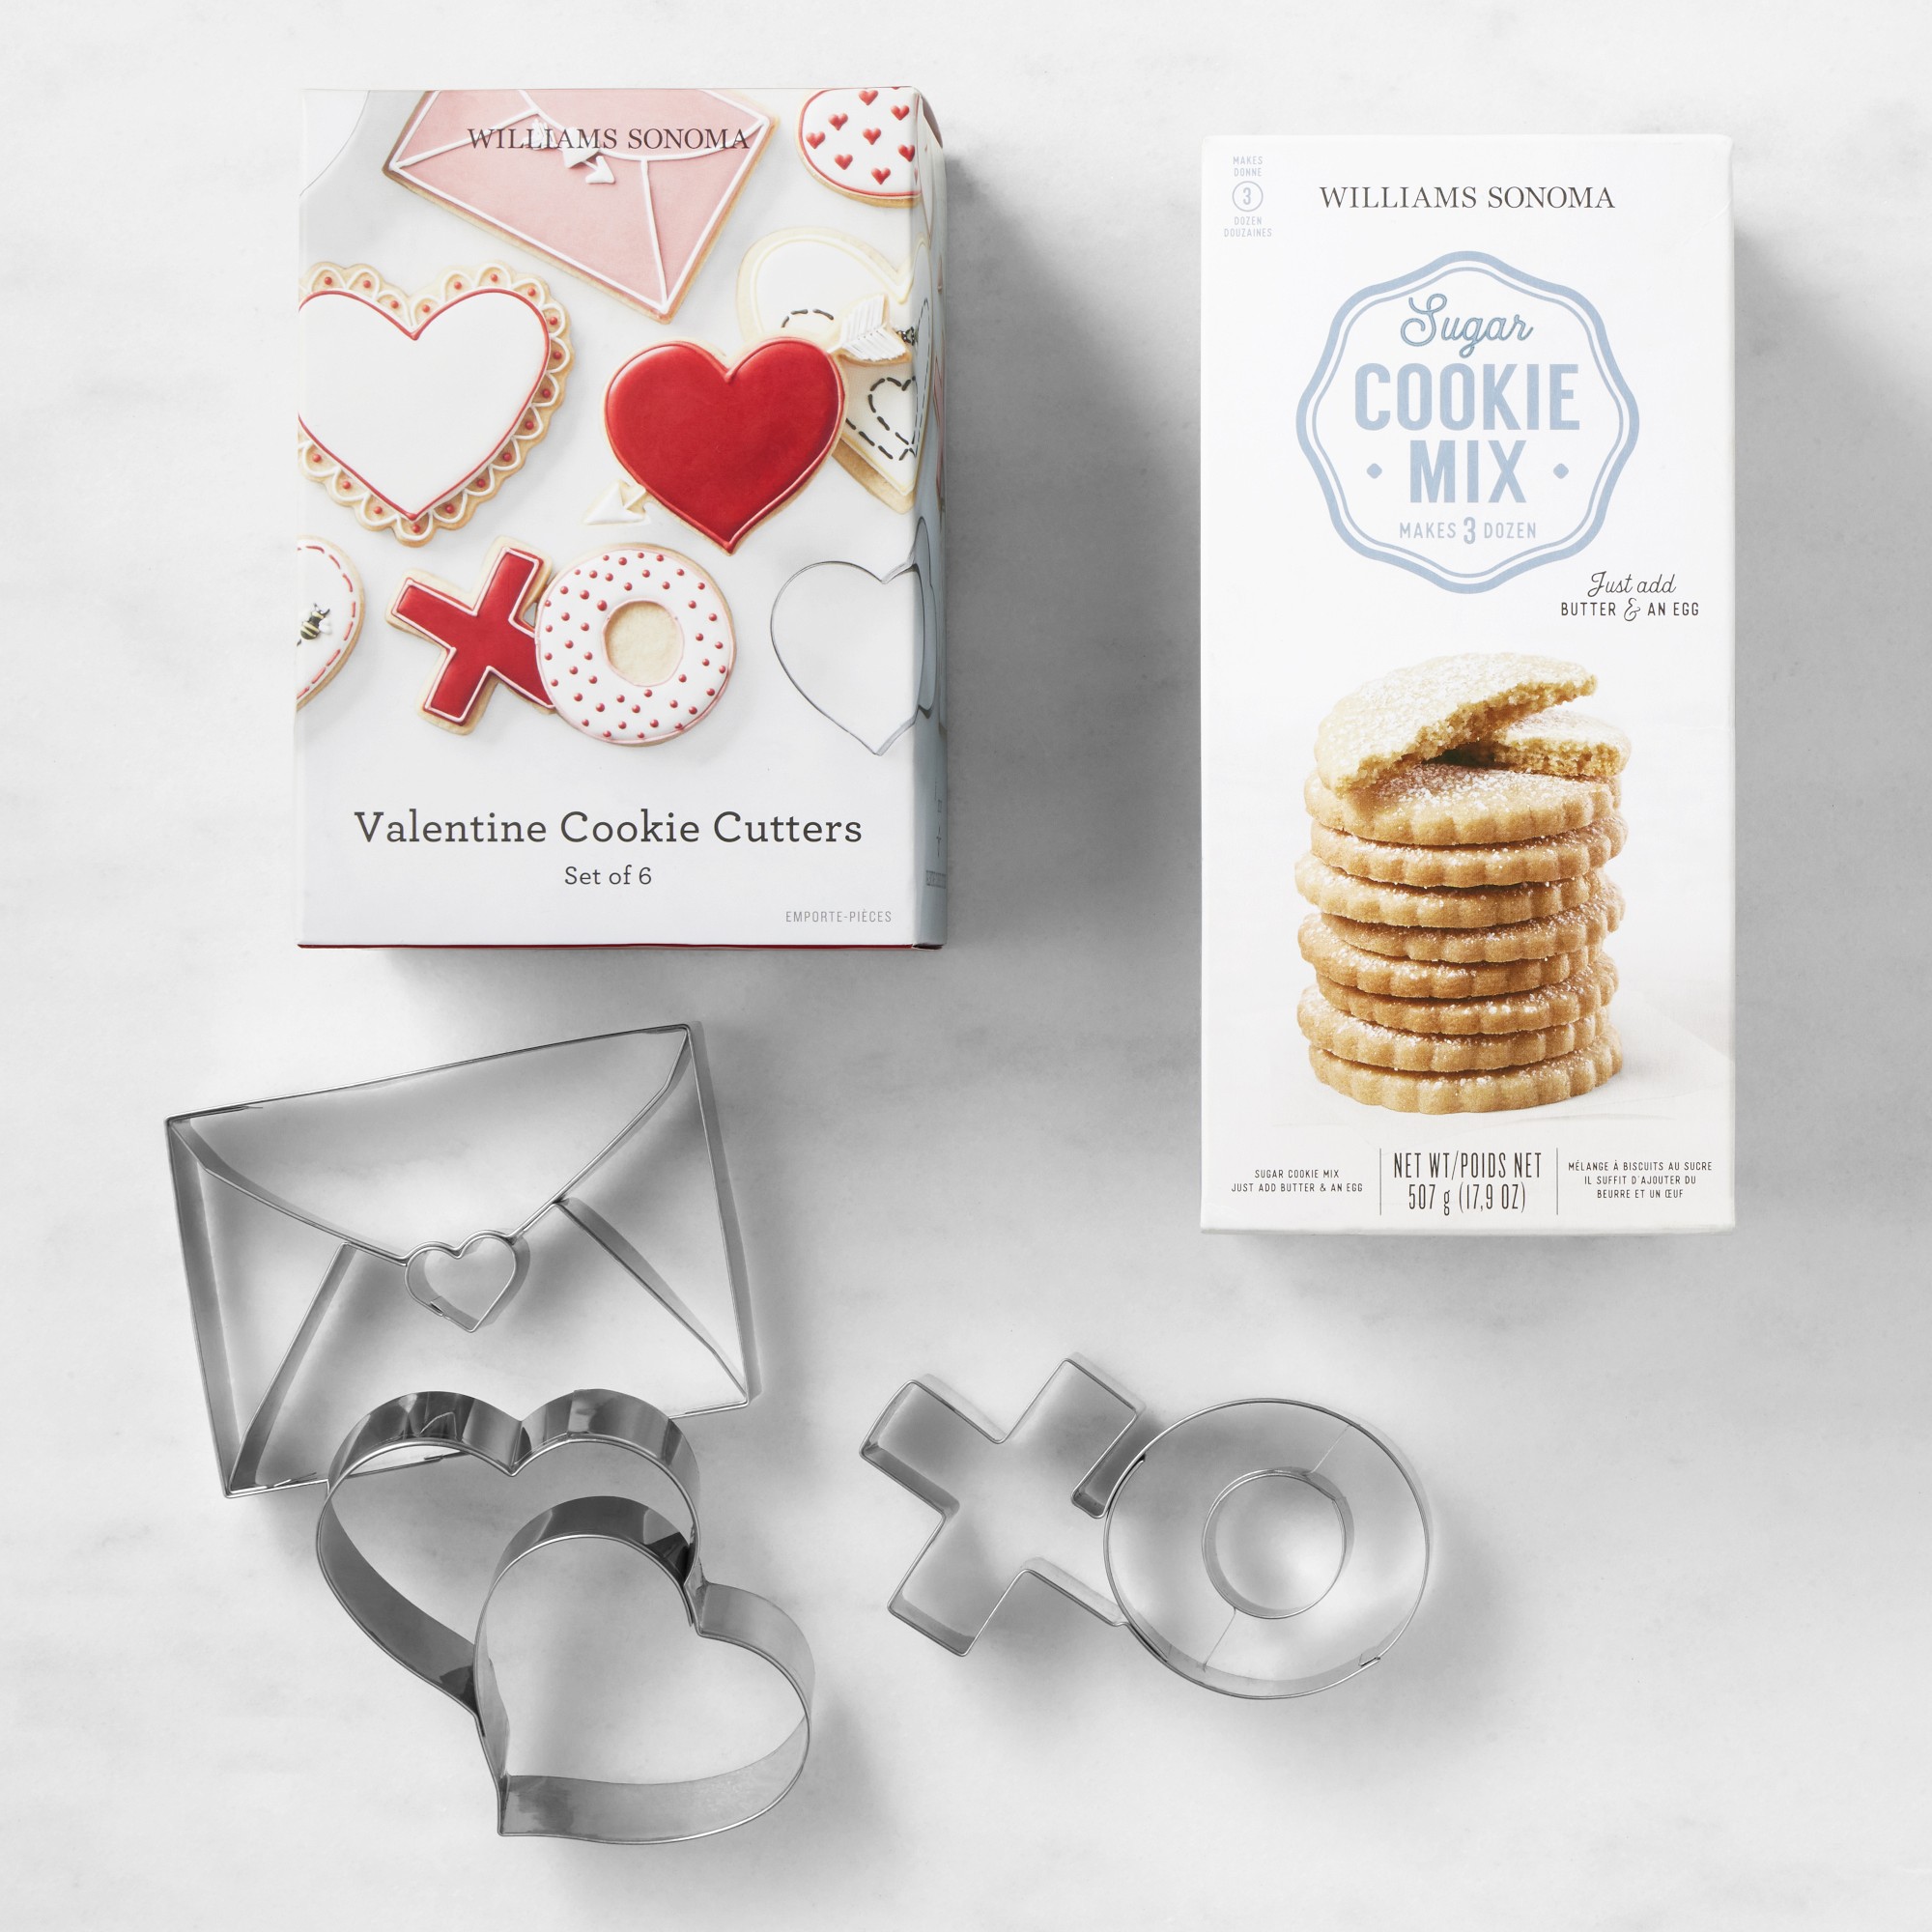 Williams Sonoma Sweet Stainless-Steel Cookie Cutters & Vanilla Sugar Cookie Mix